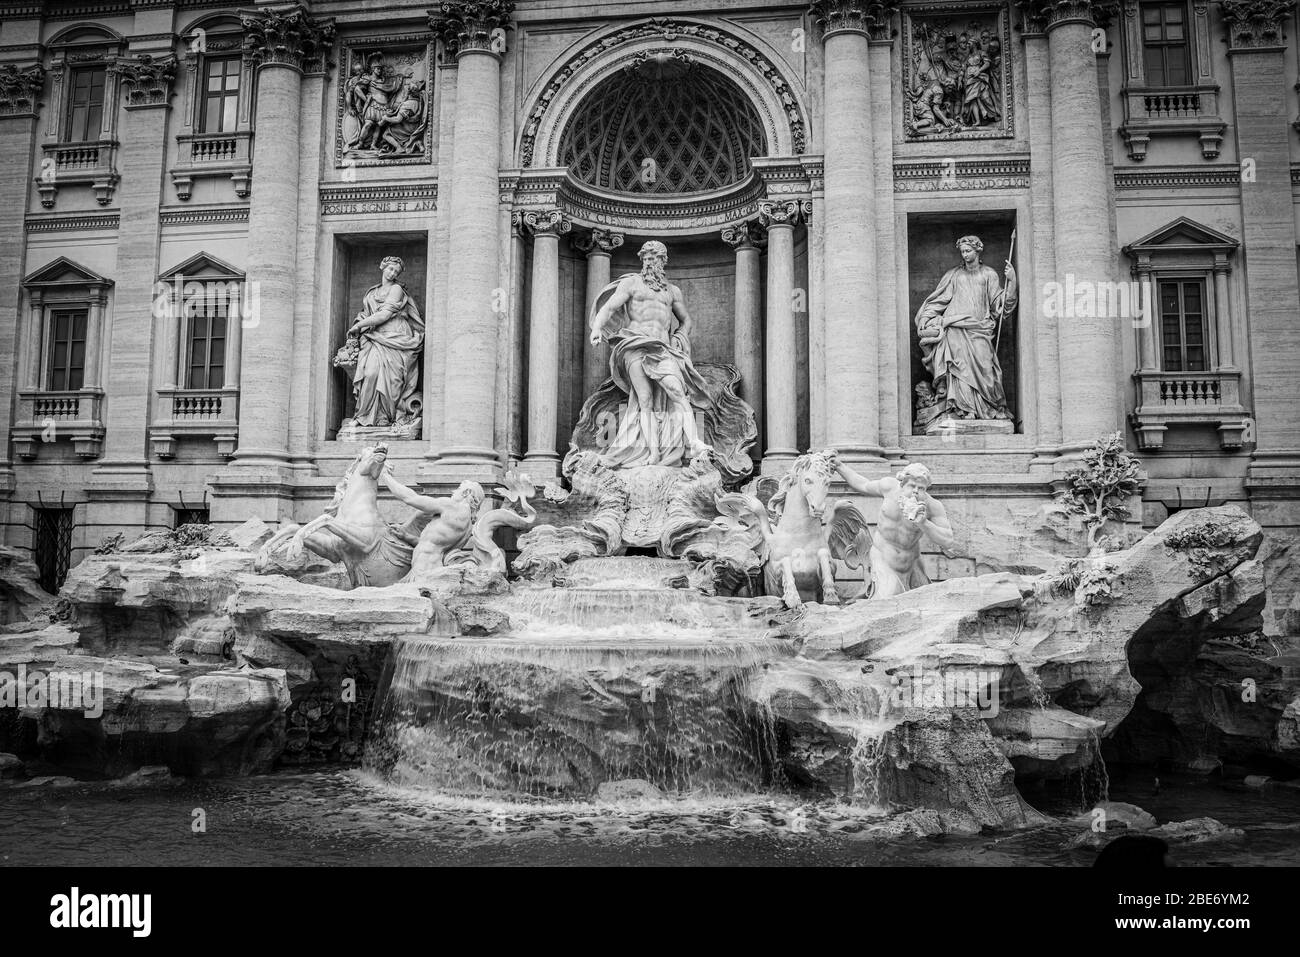 Trevi Fountain. Images of Rome, Italy during the Christmas Holidays. Stock Photo